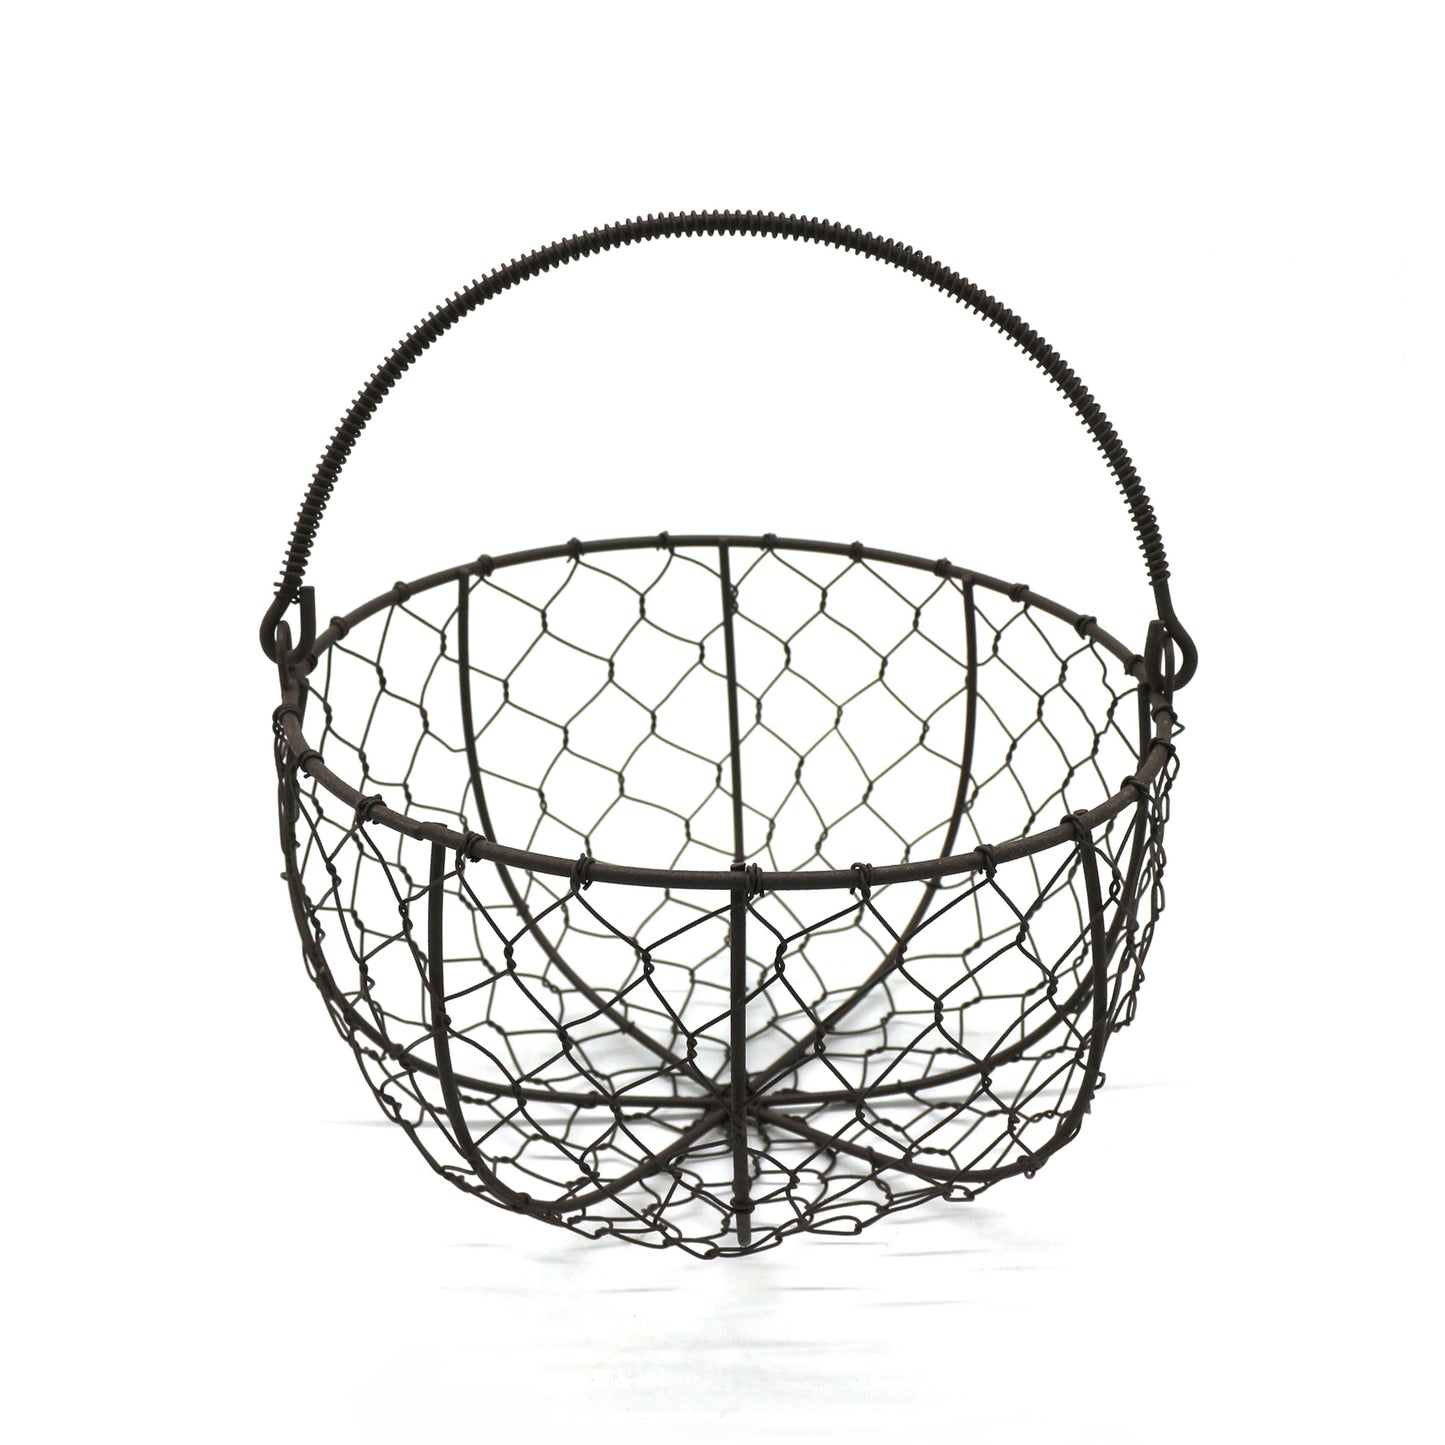 CVHOMEDECO. Round Metal Wire Egg Basket Wire Gathering Basket with Handle Country Vintage Style Storage Basket. Rusty, Dia. 8 X H 4.75 Inch